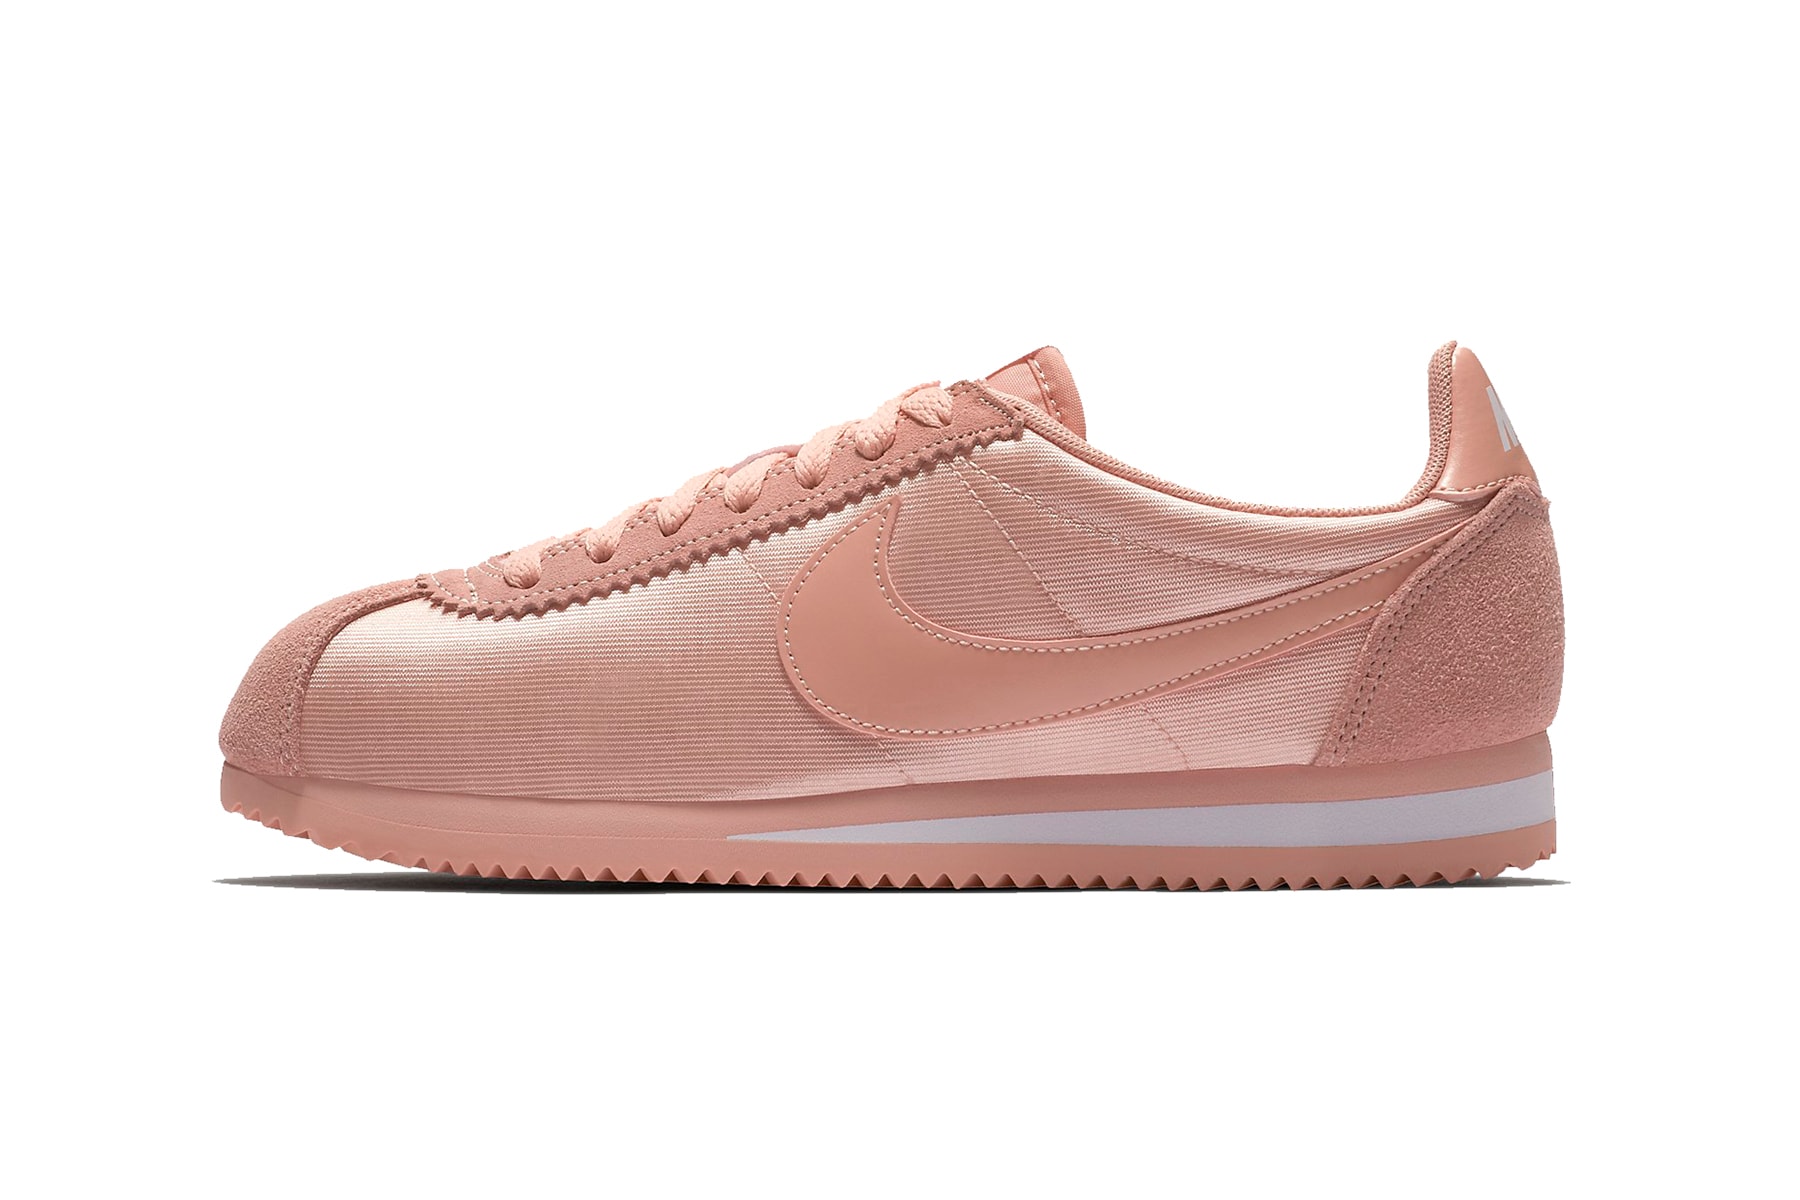 Nike Classic Cortez Nylon Coral Stardust White Pink Pastel Spring Summer 2018 Shop Release Price Date Information Where to Buy